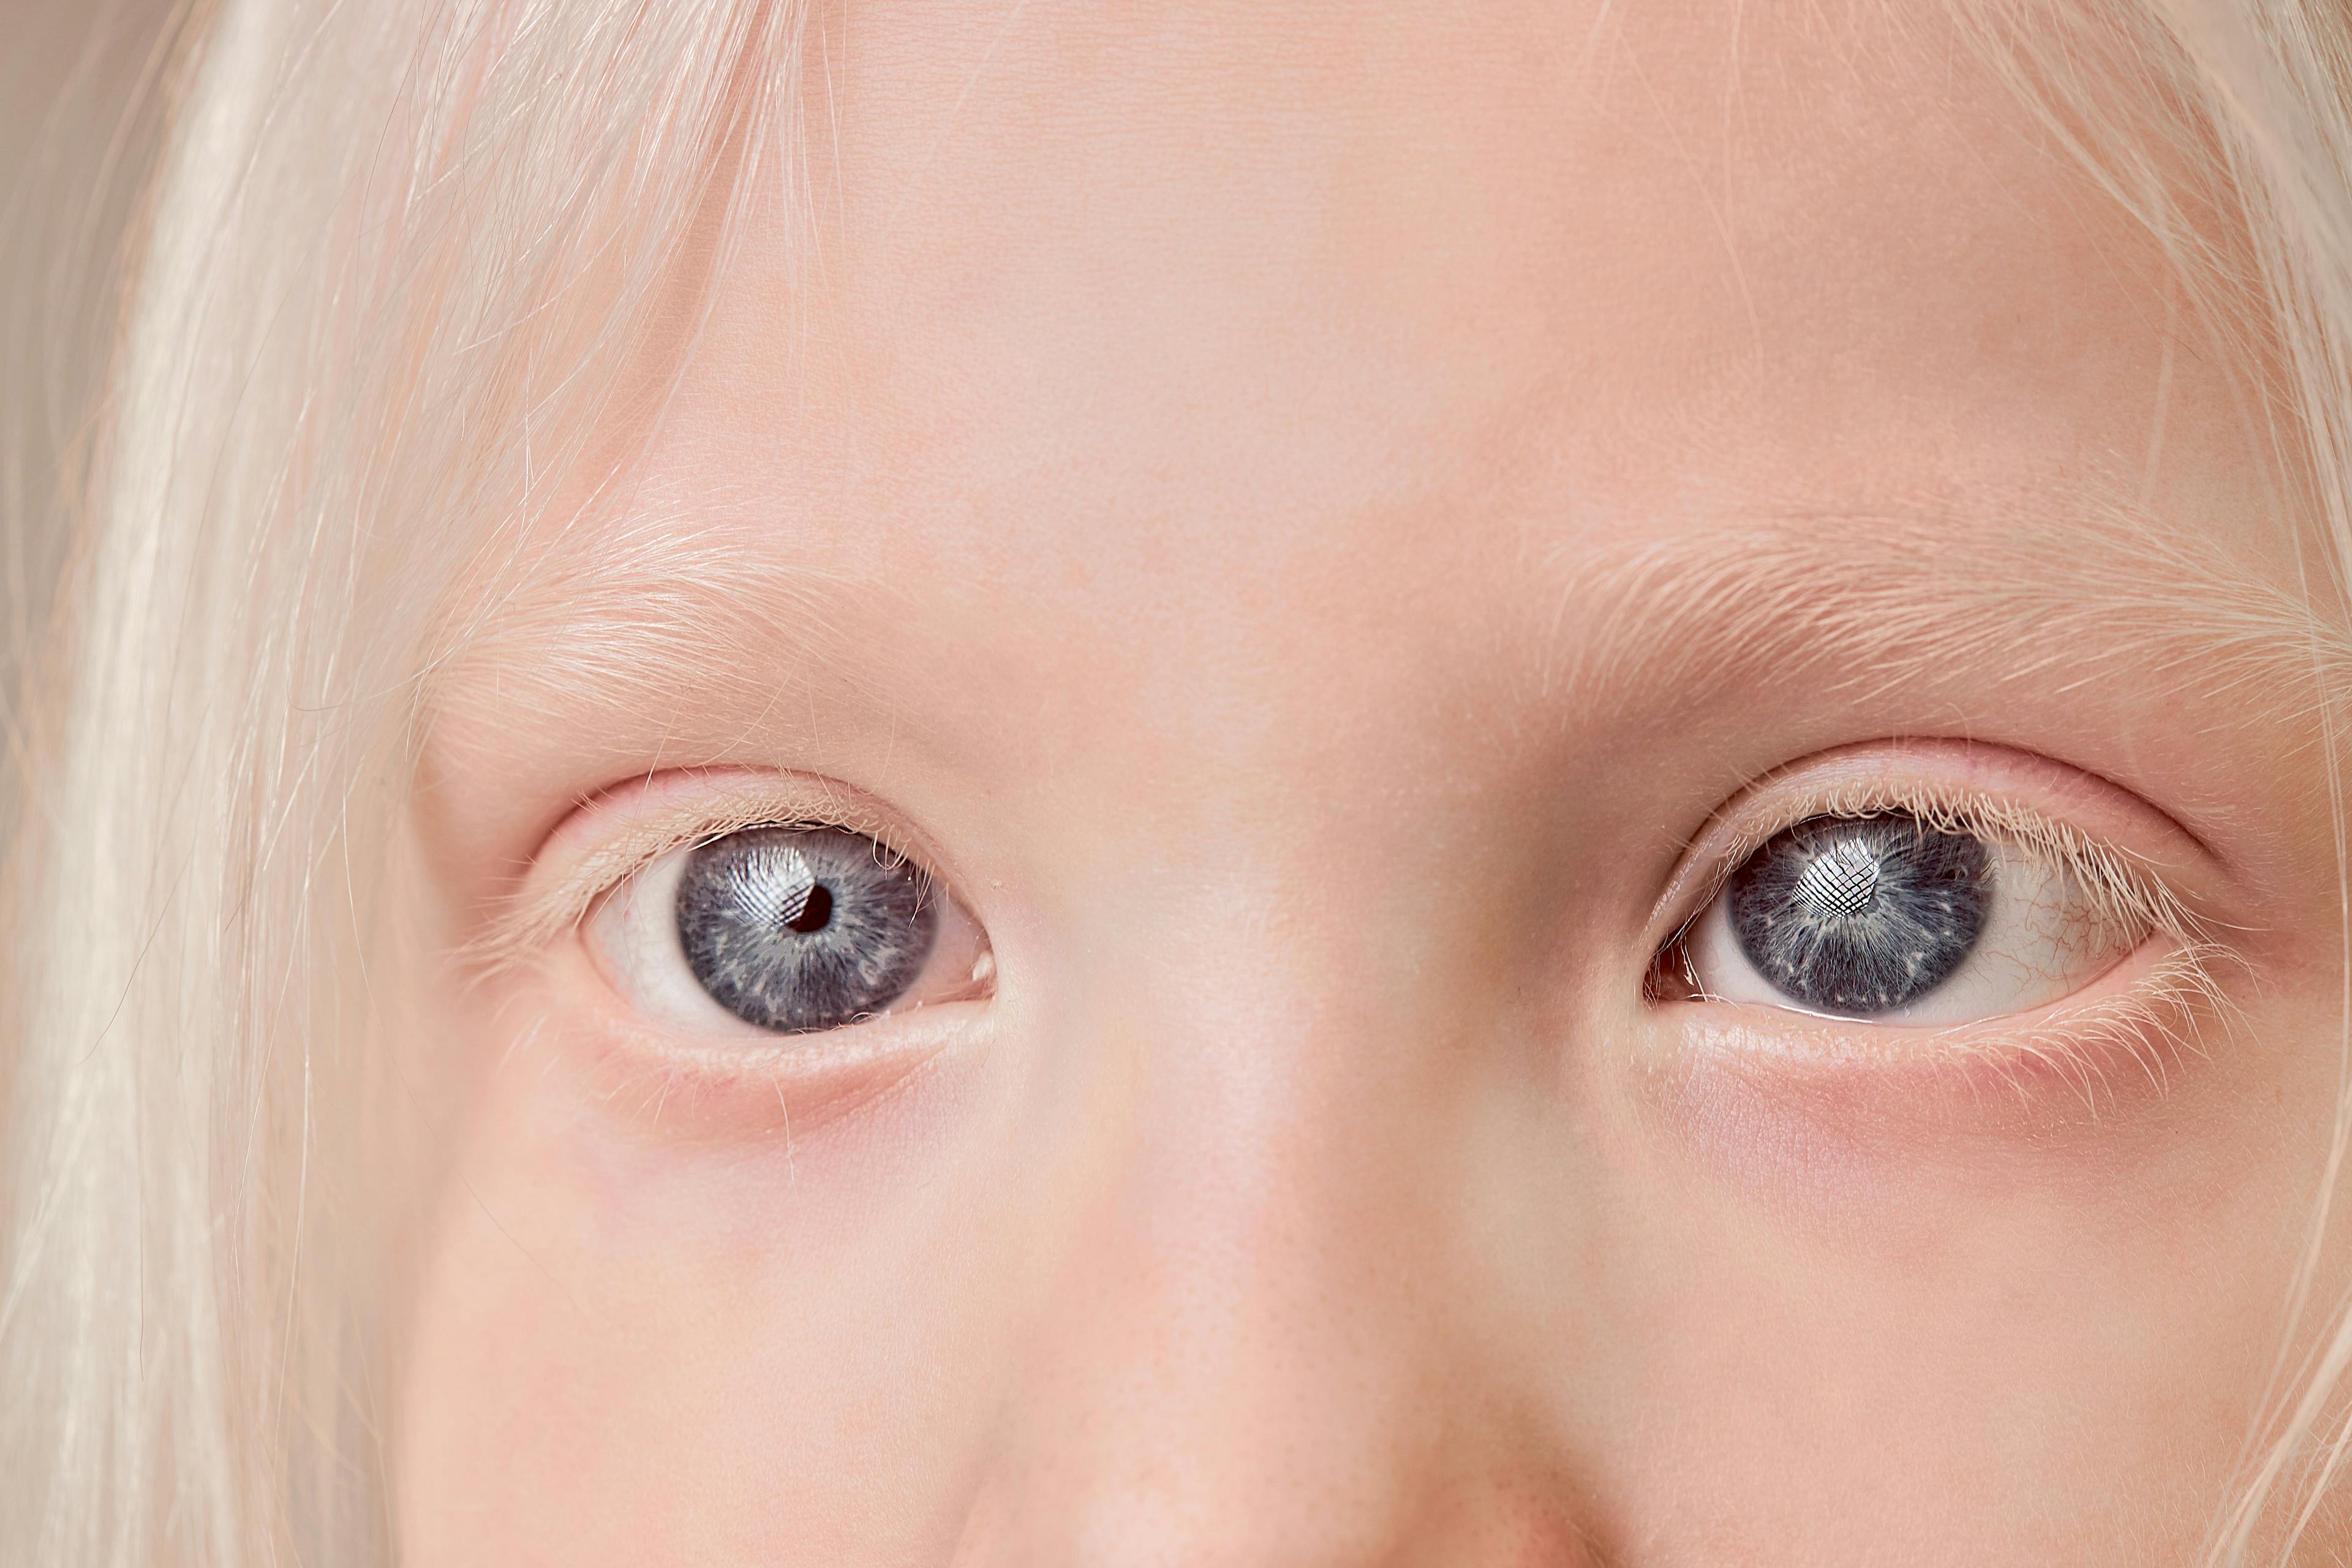 Close up of the eyes and face of a young girl with albinism